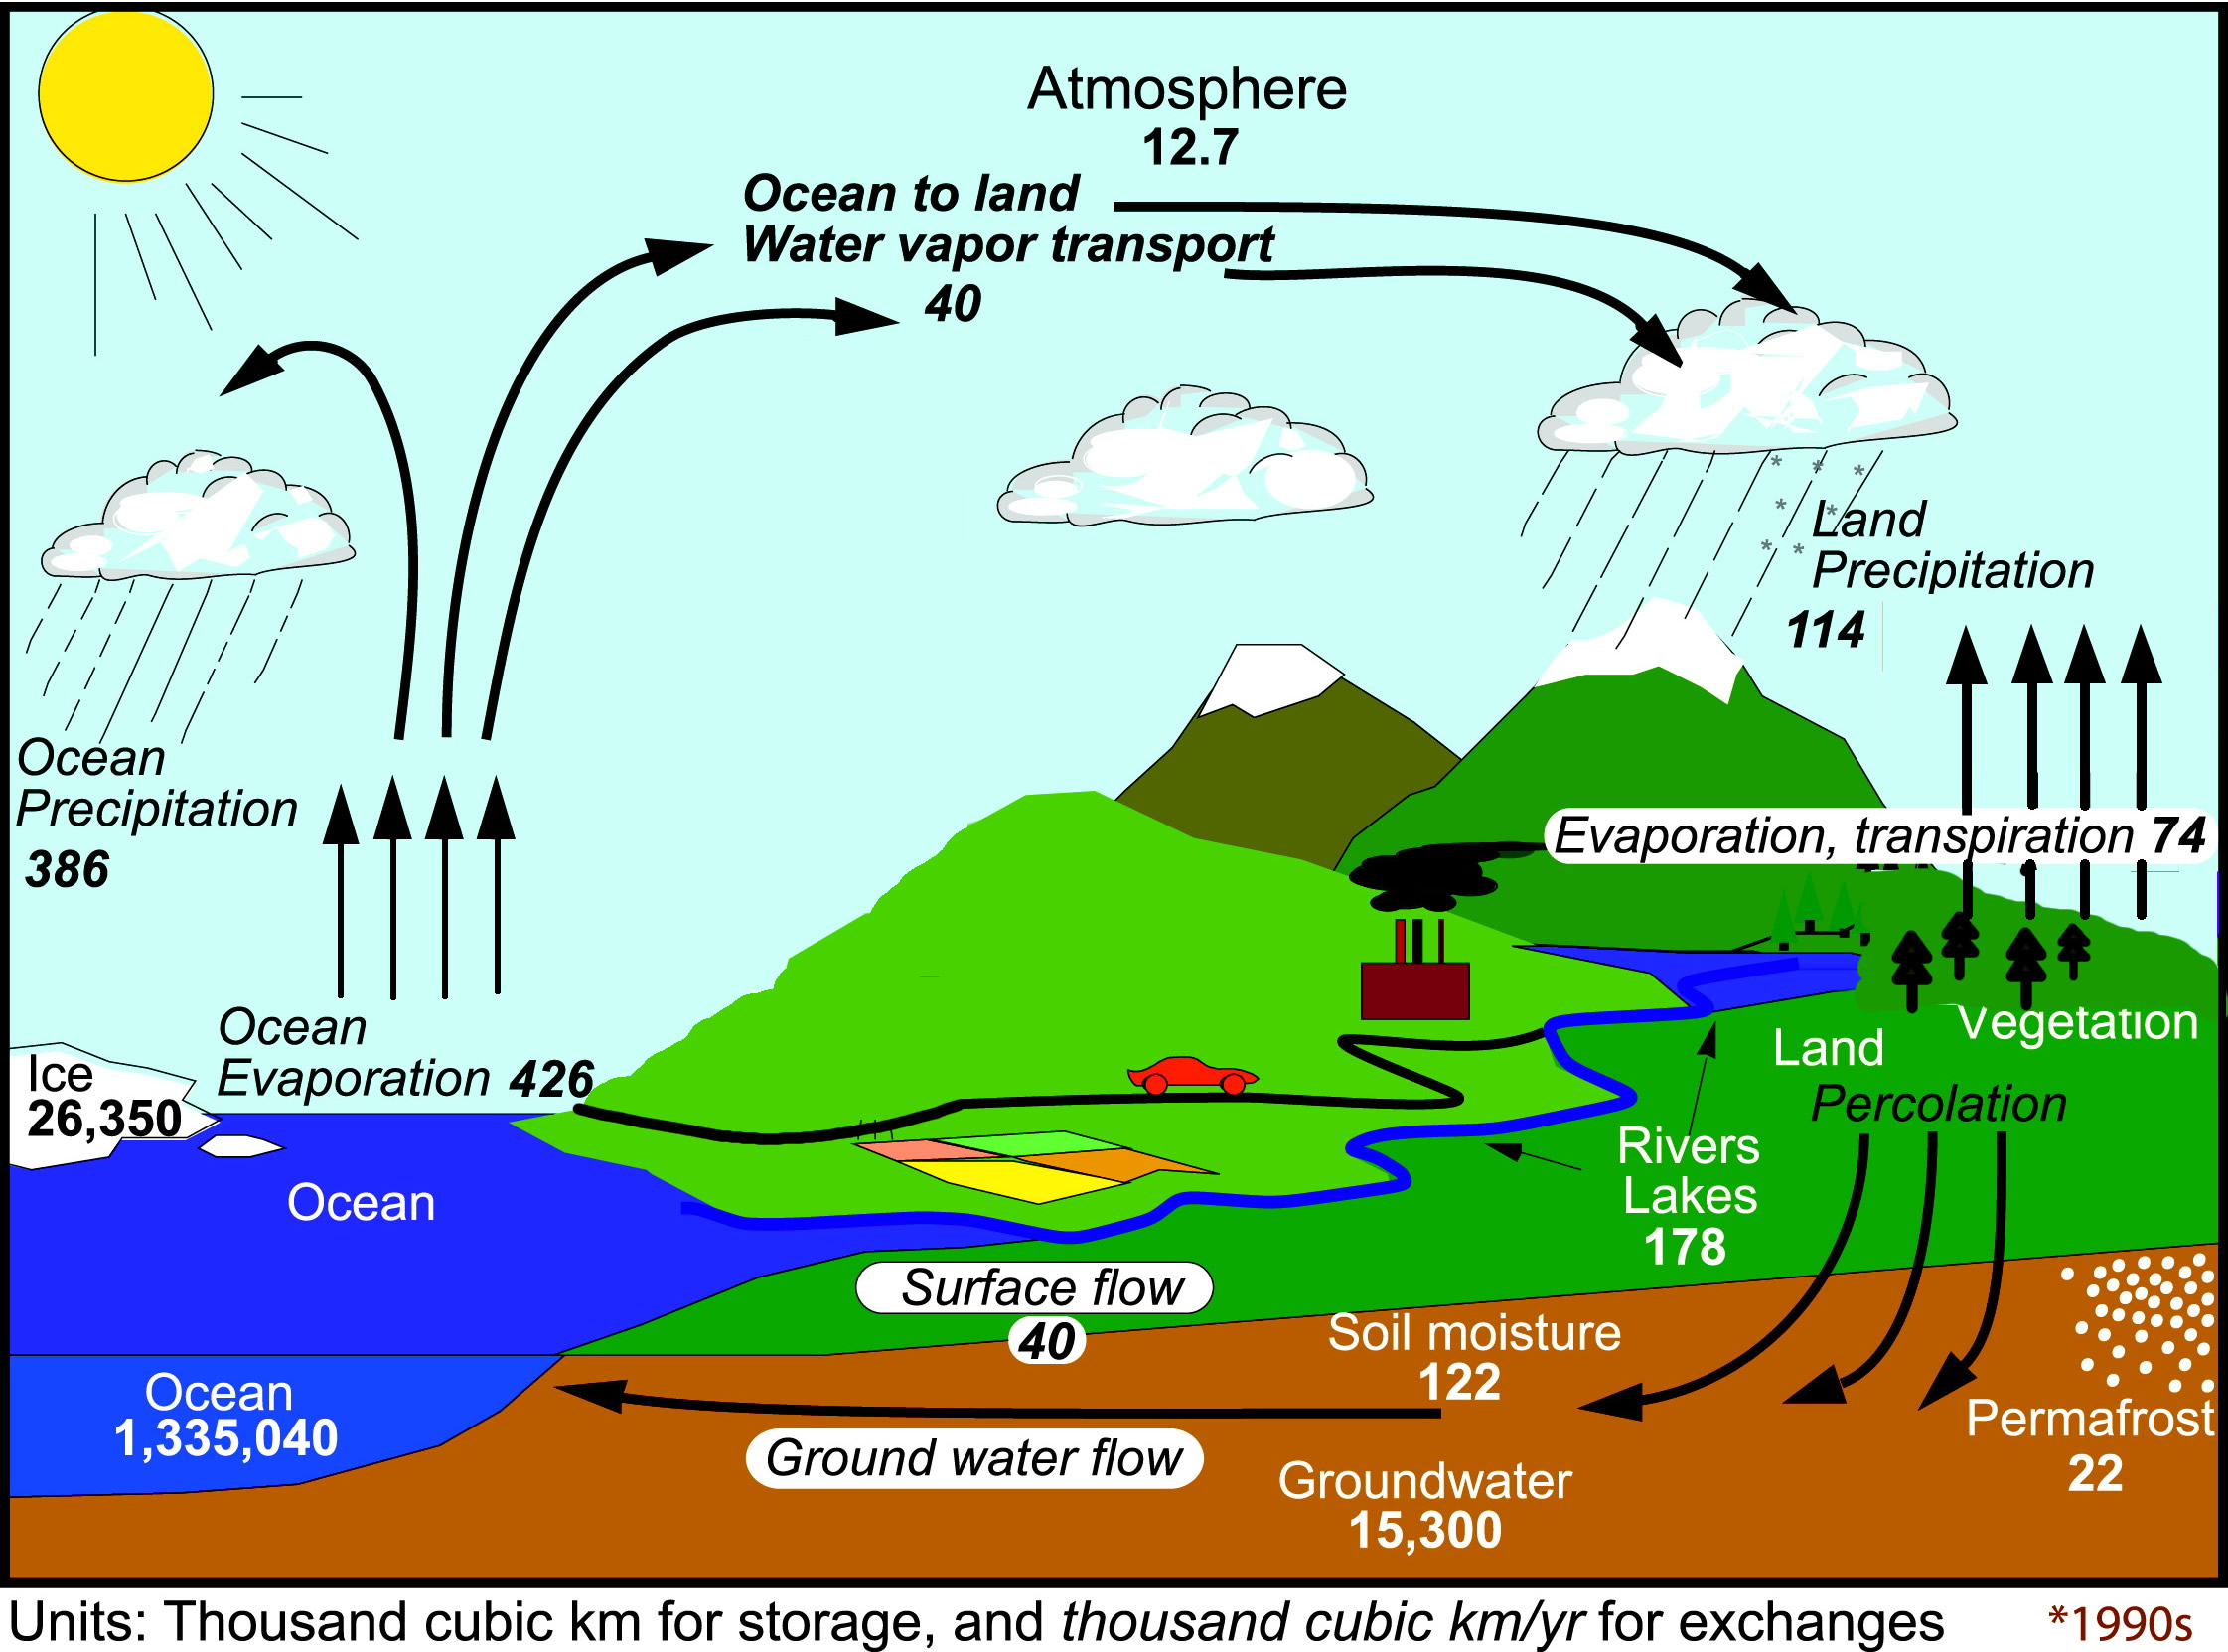 Human modification of global water vapor flows from the land surface